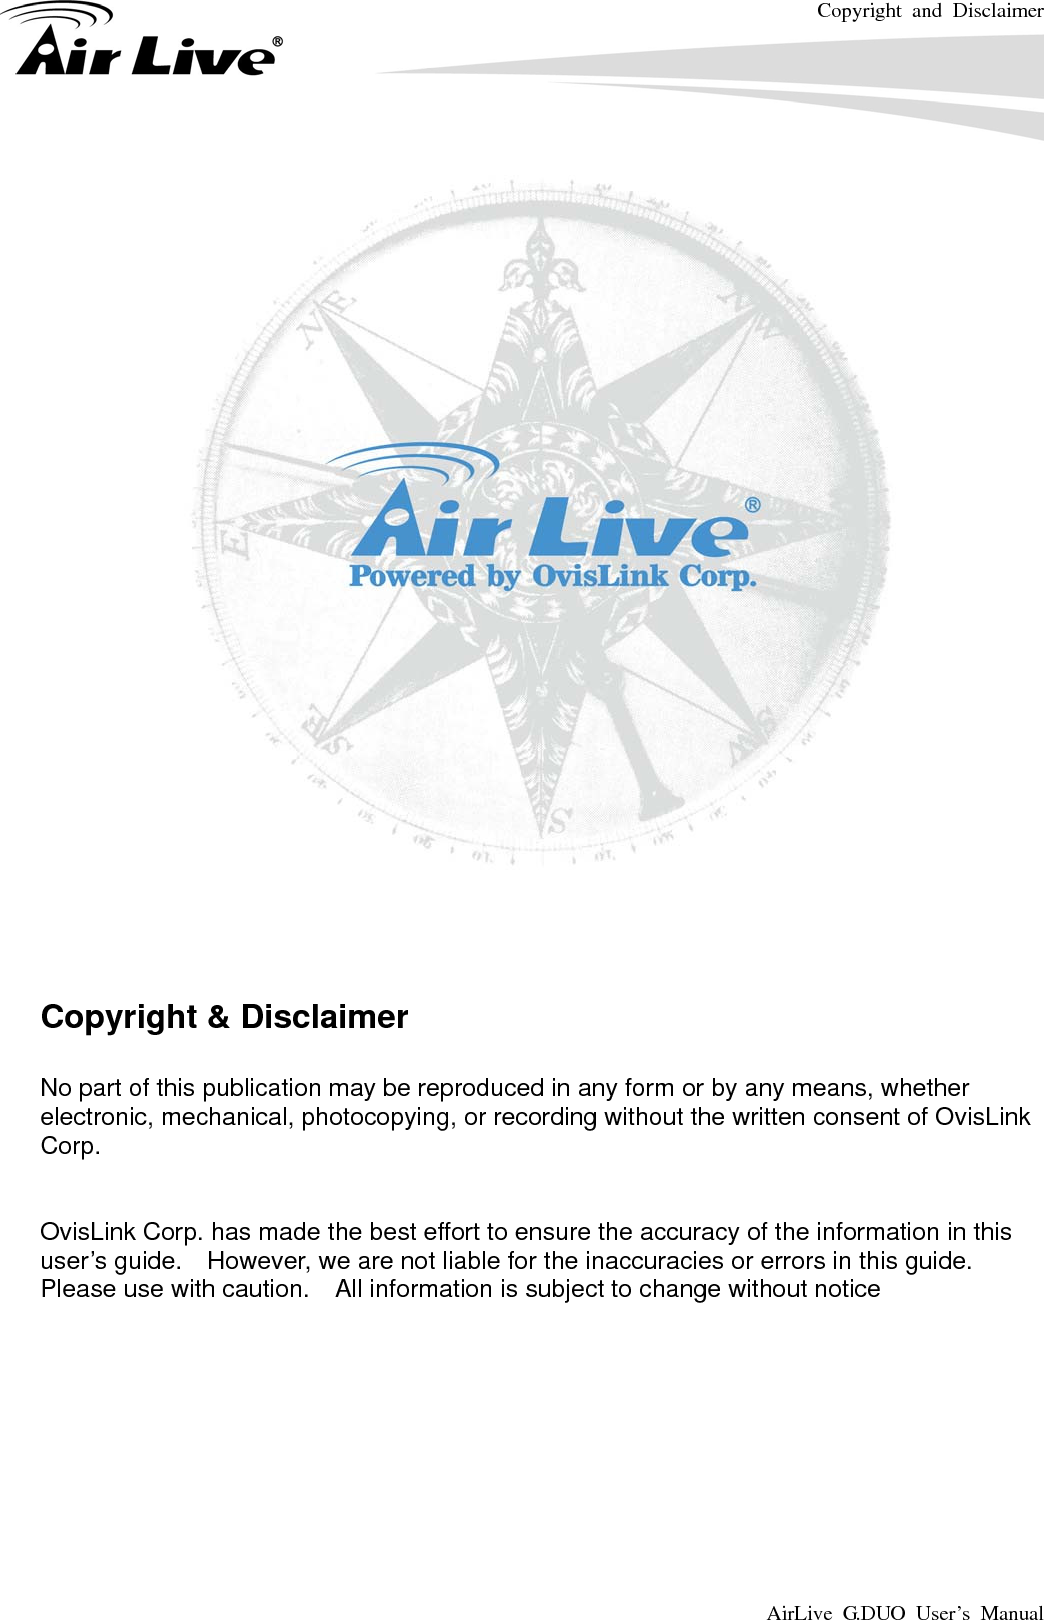 Copyright and Disclaimer AirLive G.DUO User’s Manual         Copyright &amp; Disclaimer  No part of this publication may be reproduced in any form or by any means, whether electronic, mechanical, photocopying, or recording without the written consent of OvisLink Corp.    OvisLink Corp. has made the best effort to ensure the accuracy of the information in this user’s guide.    However, we are not liable for the inaccuracies or errors in this guide.   Please use with caution.    All information is subject to change without notice          